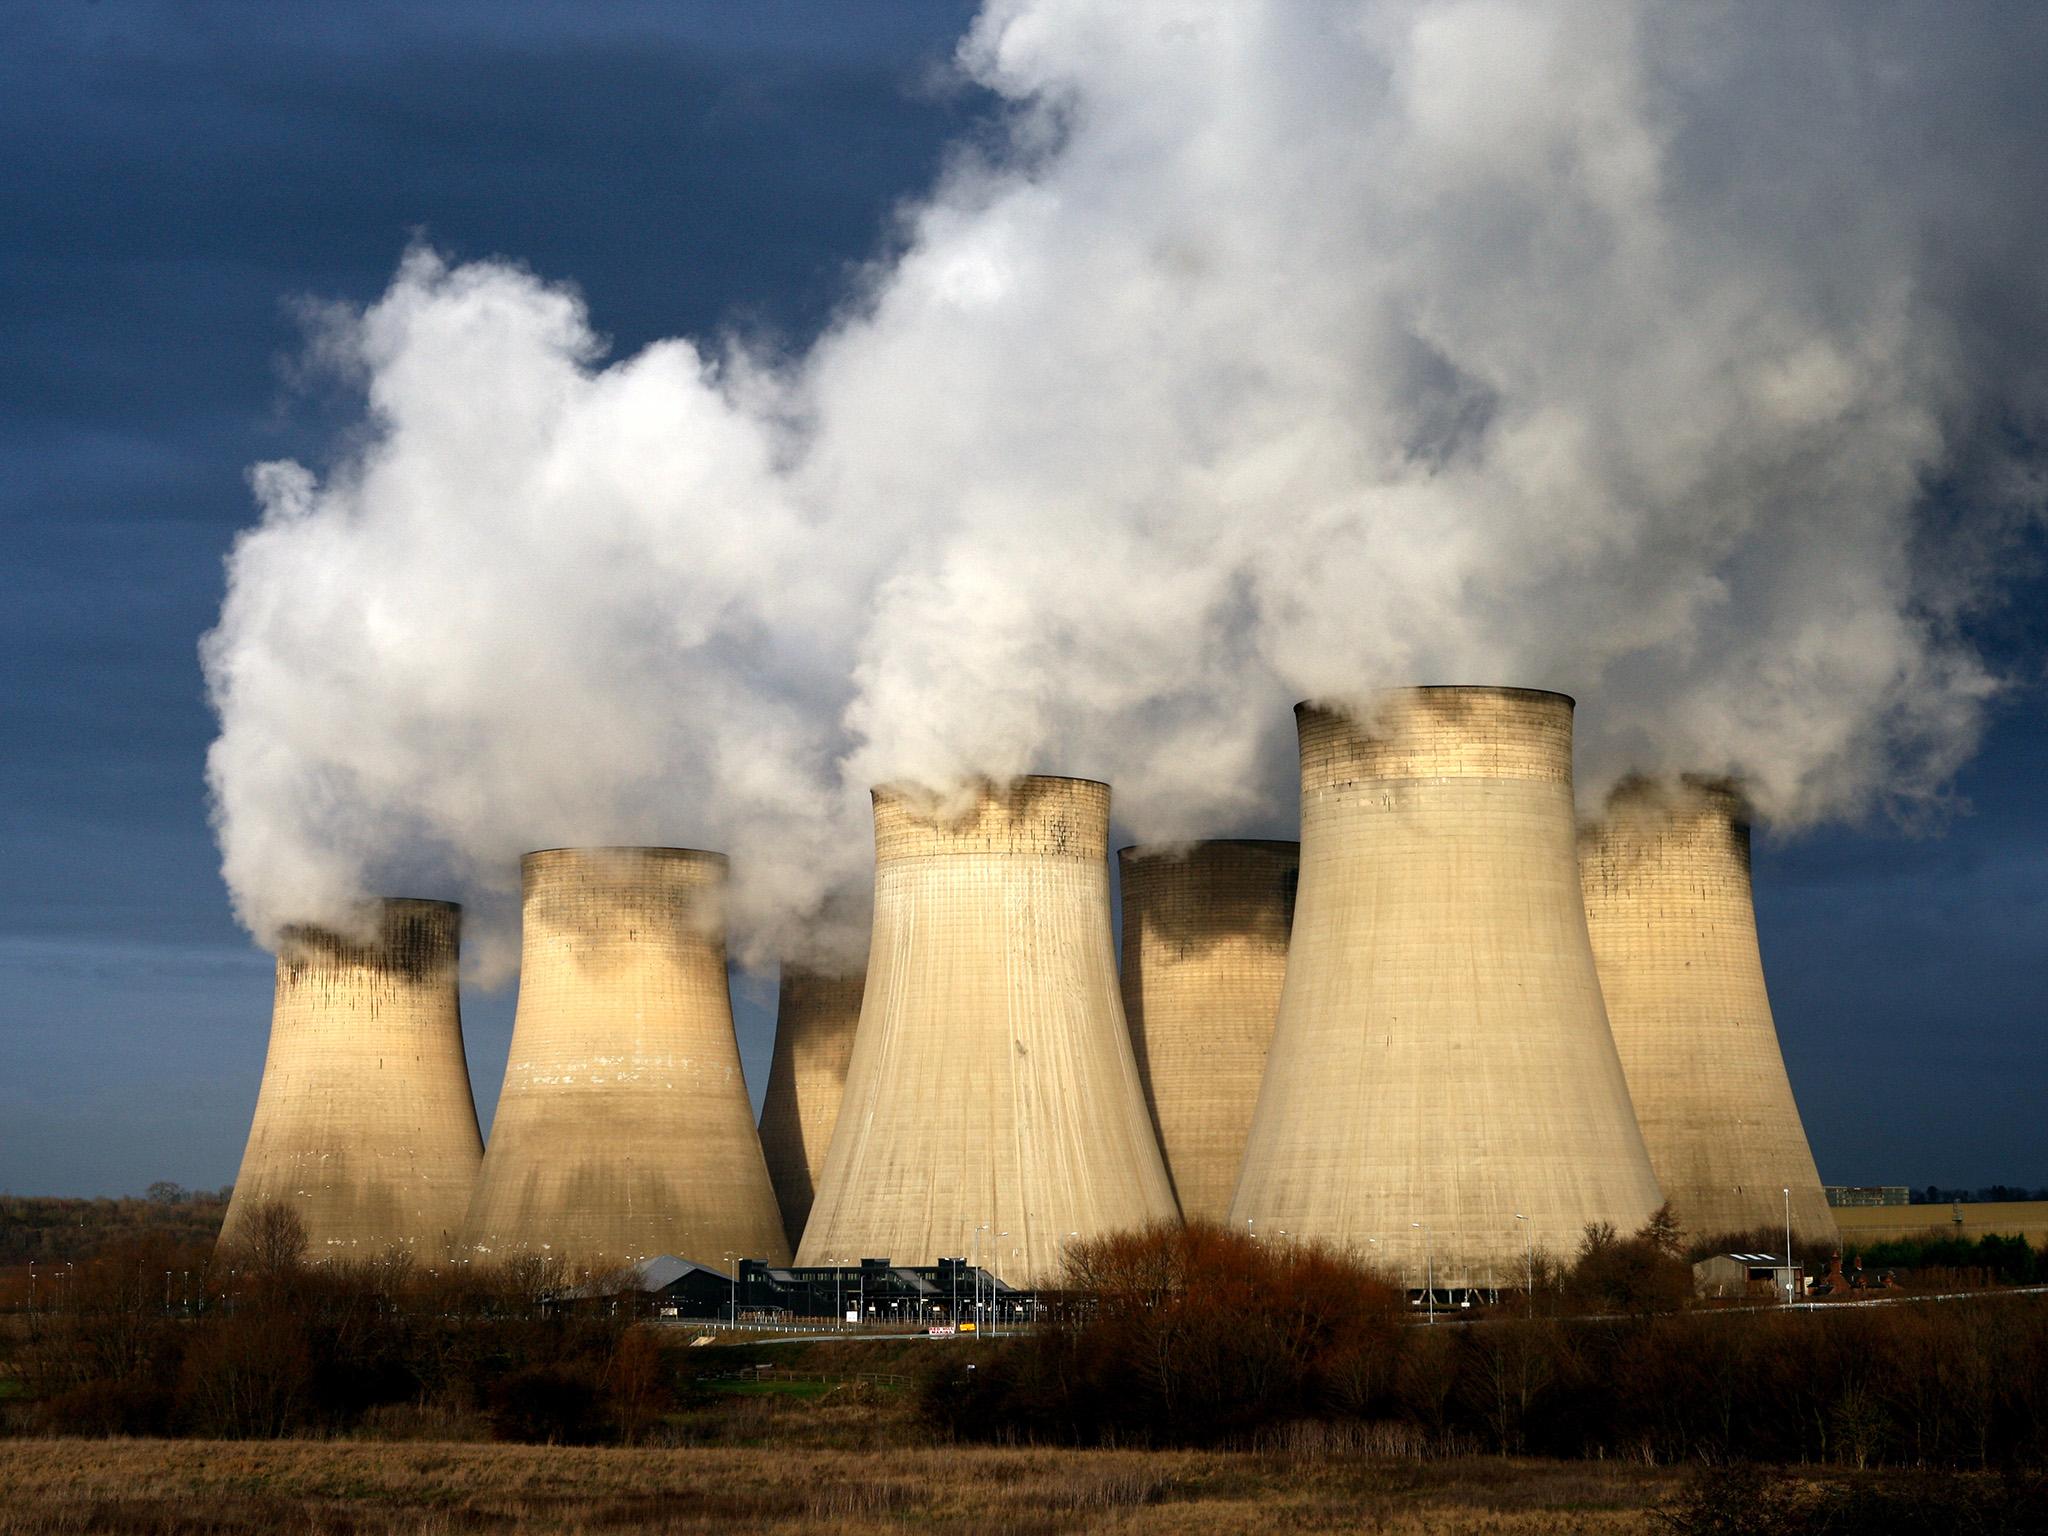 Ratcliffe On Soar power station in Nottinghamshire is one of a handful of coal power stations still operating in the UK